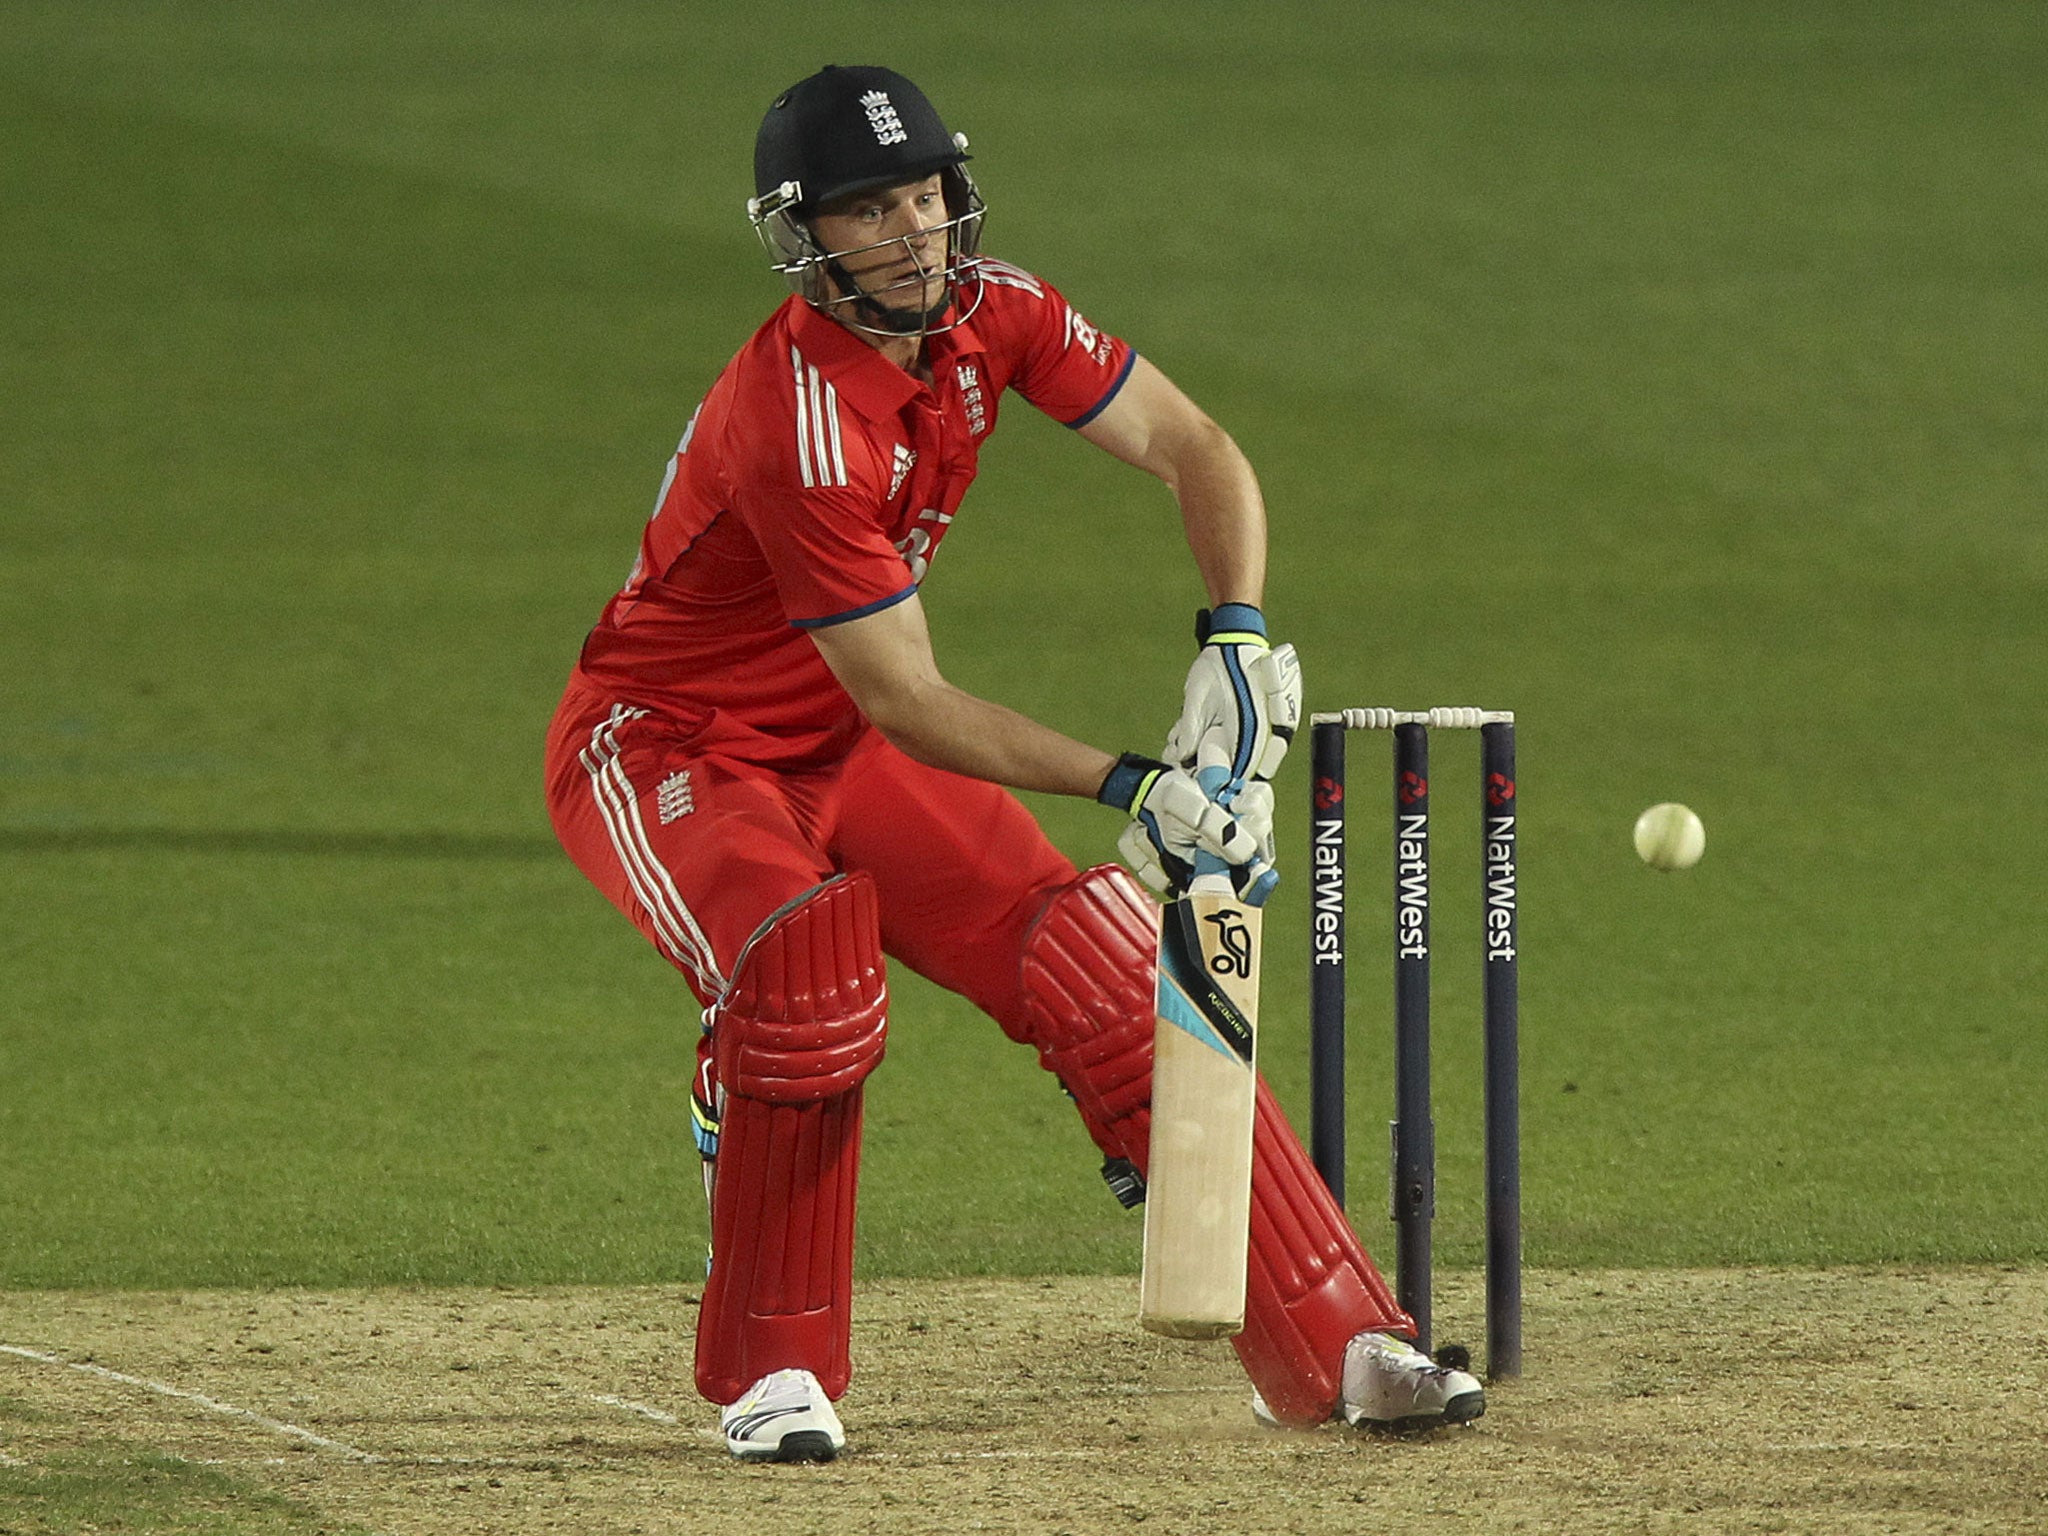 Jos Buttler will be hoping to make a big impression at the 2015 World Cup.